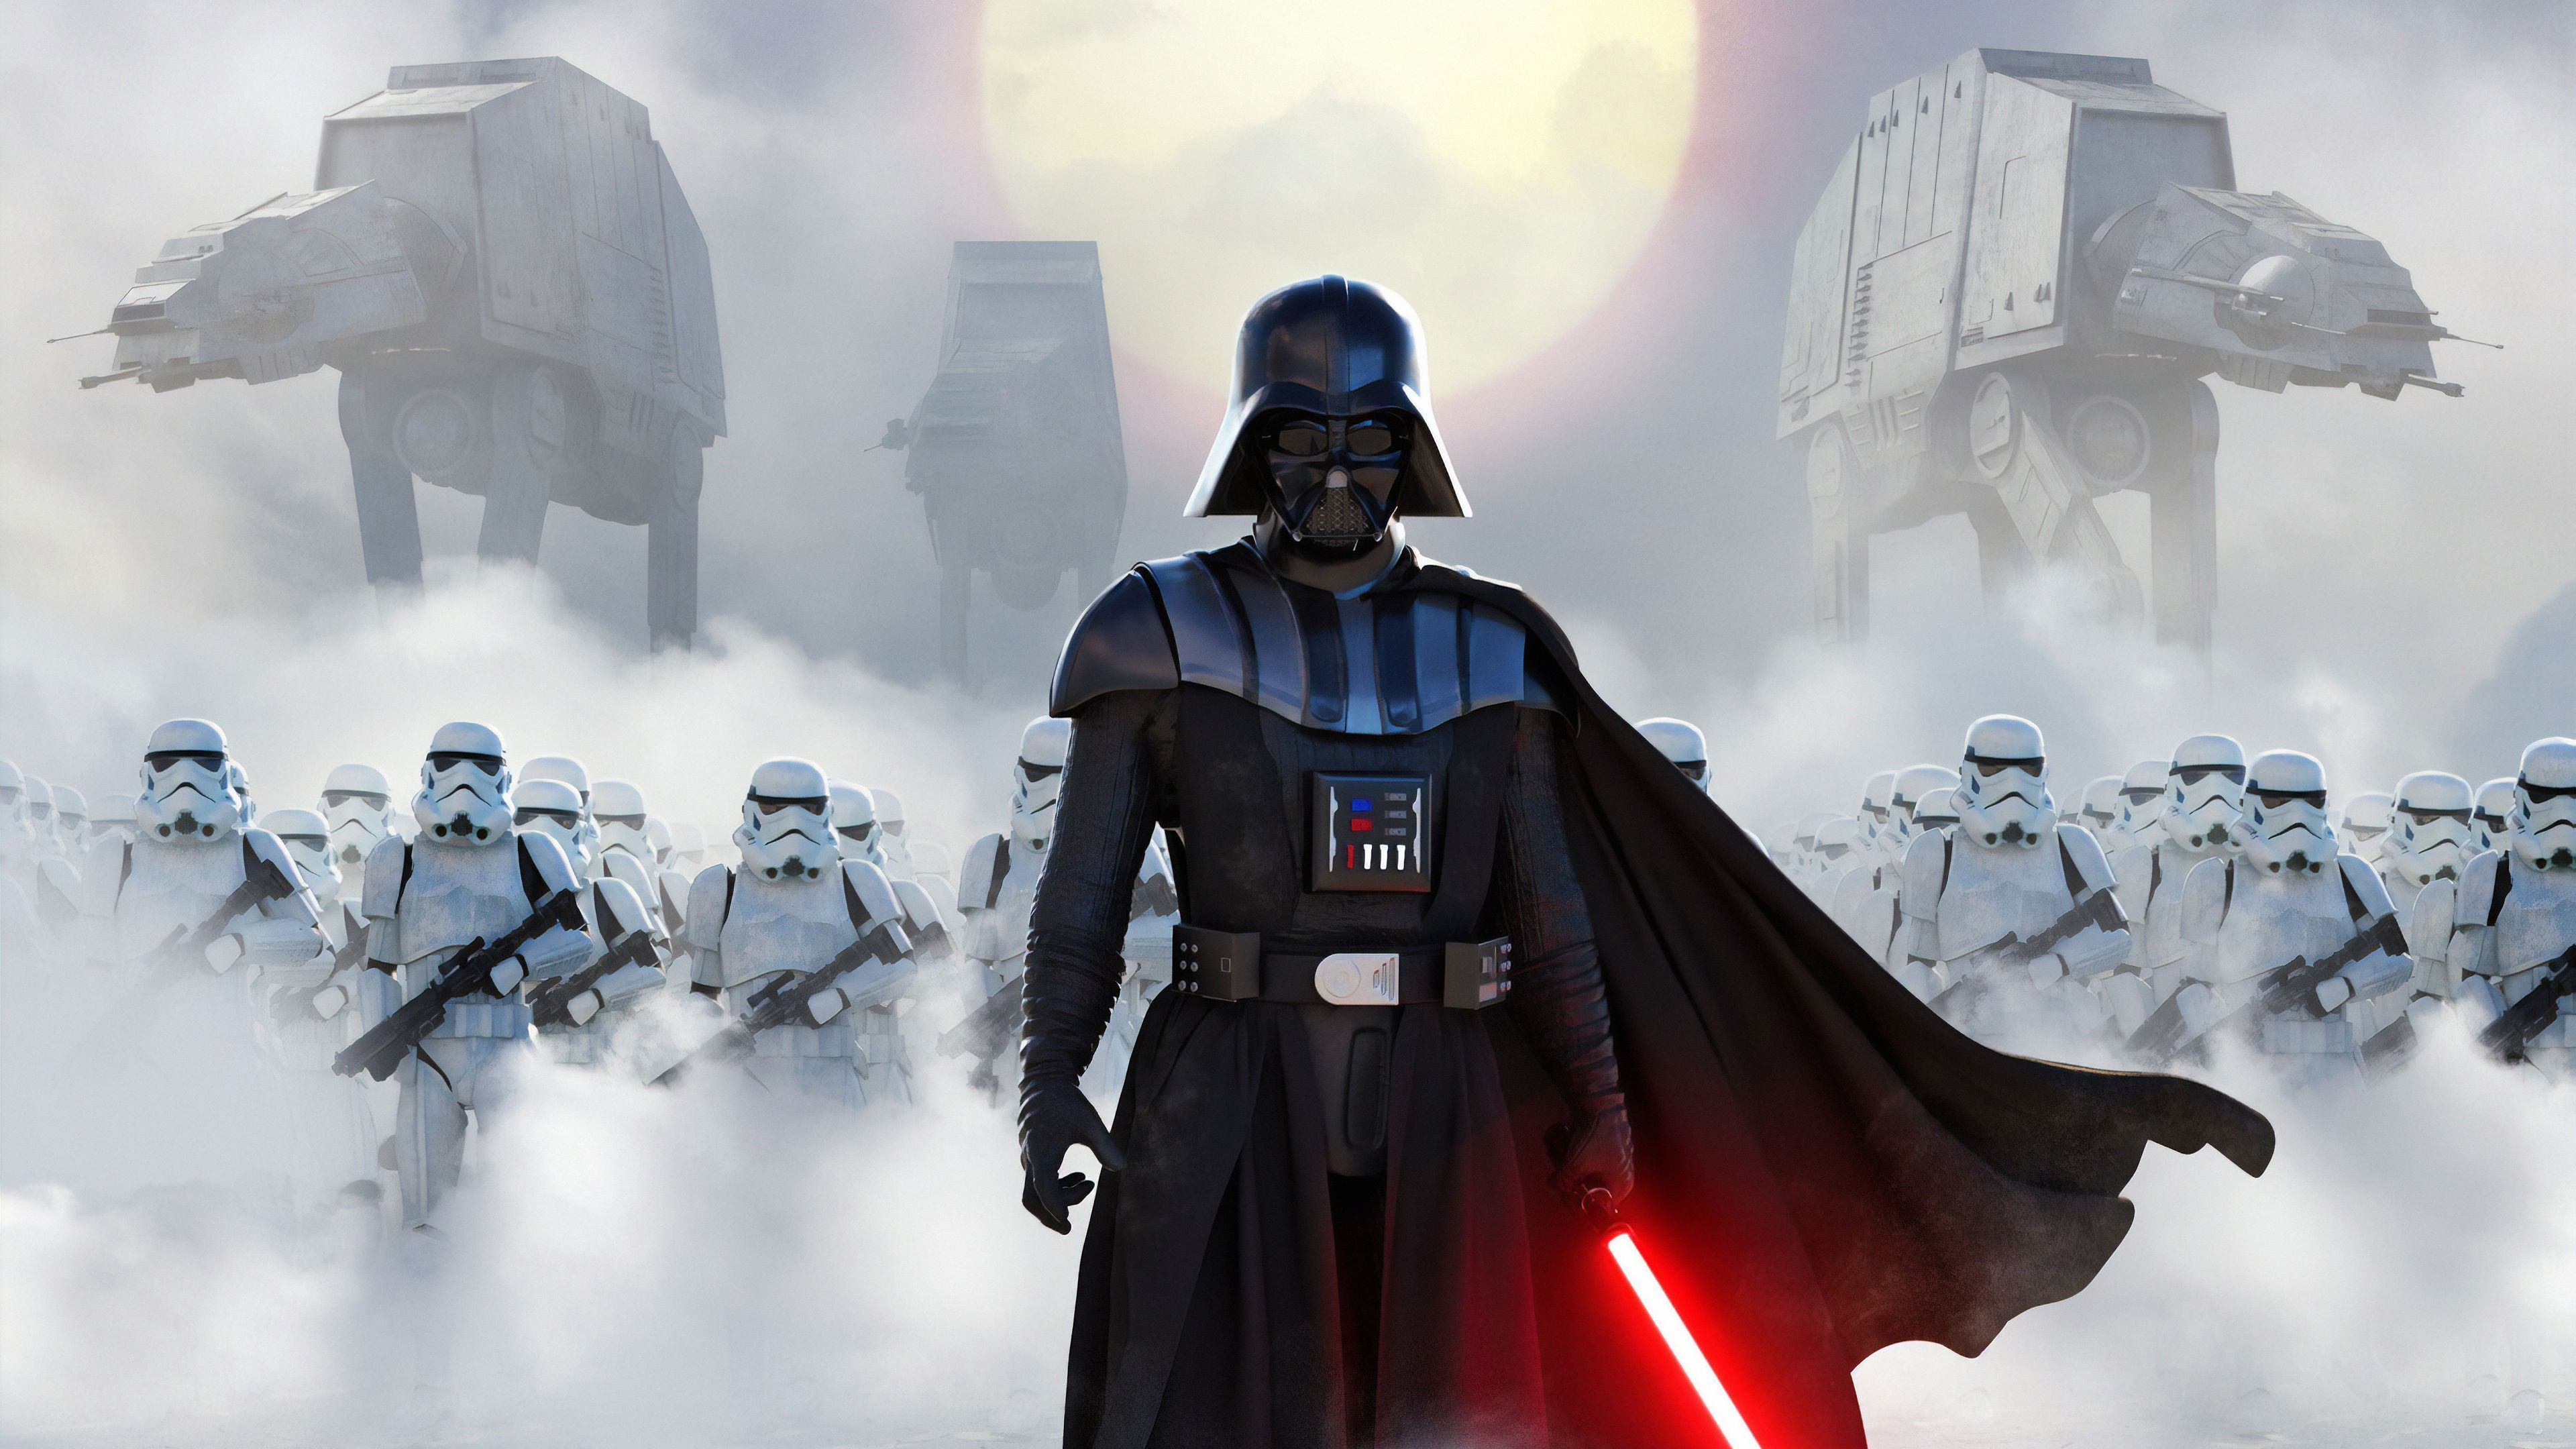 Vader Wallpapers